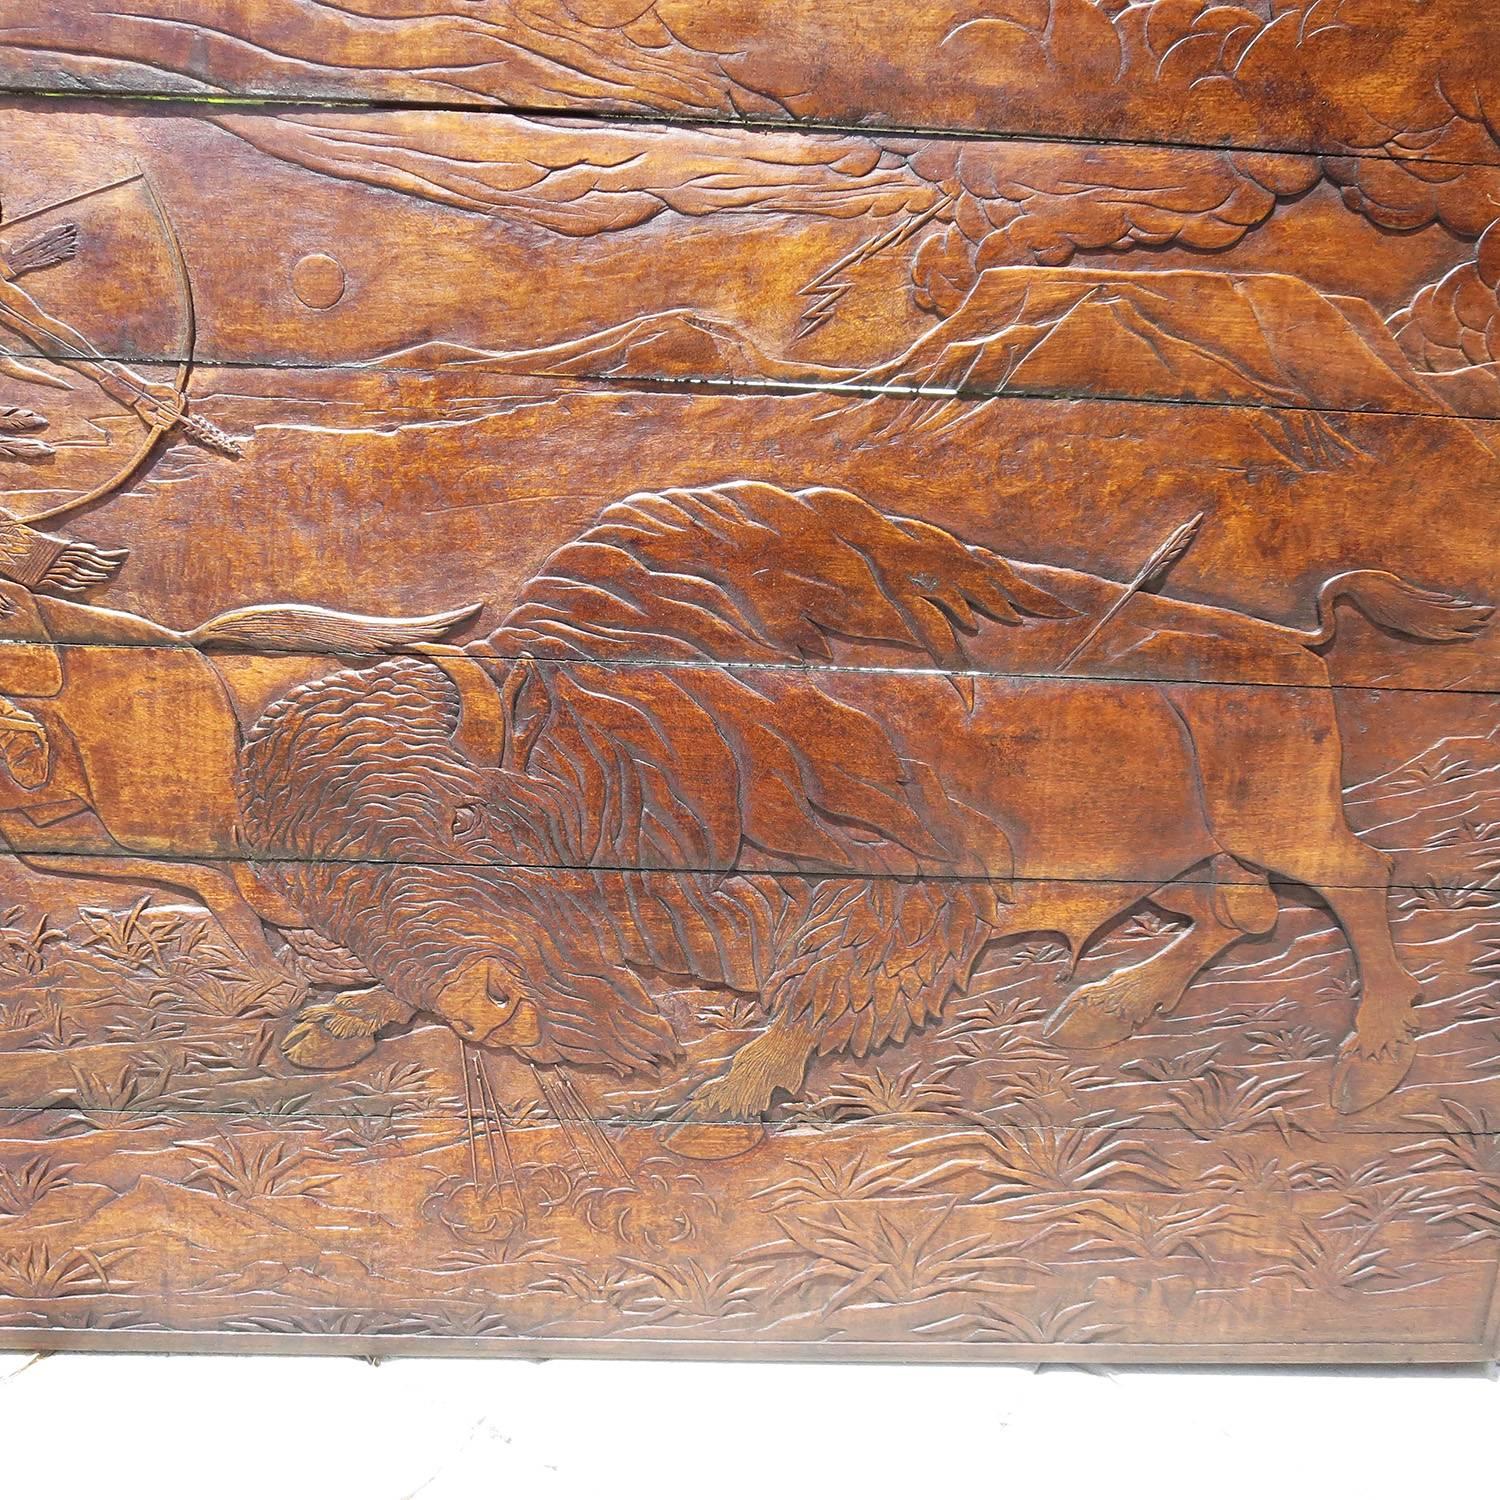 Native Hunting Buffalo Carved Wooden Wall Panel Art by Leanora Oliver Nunn 1